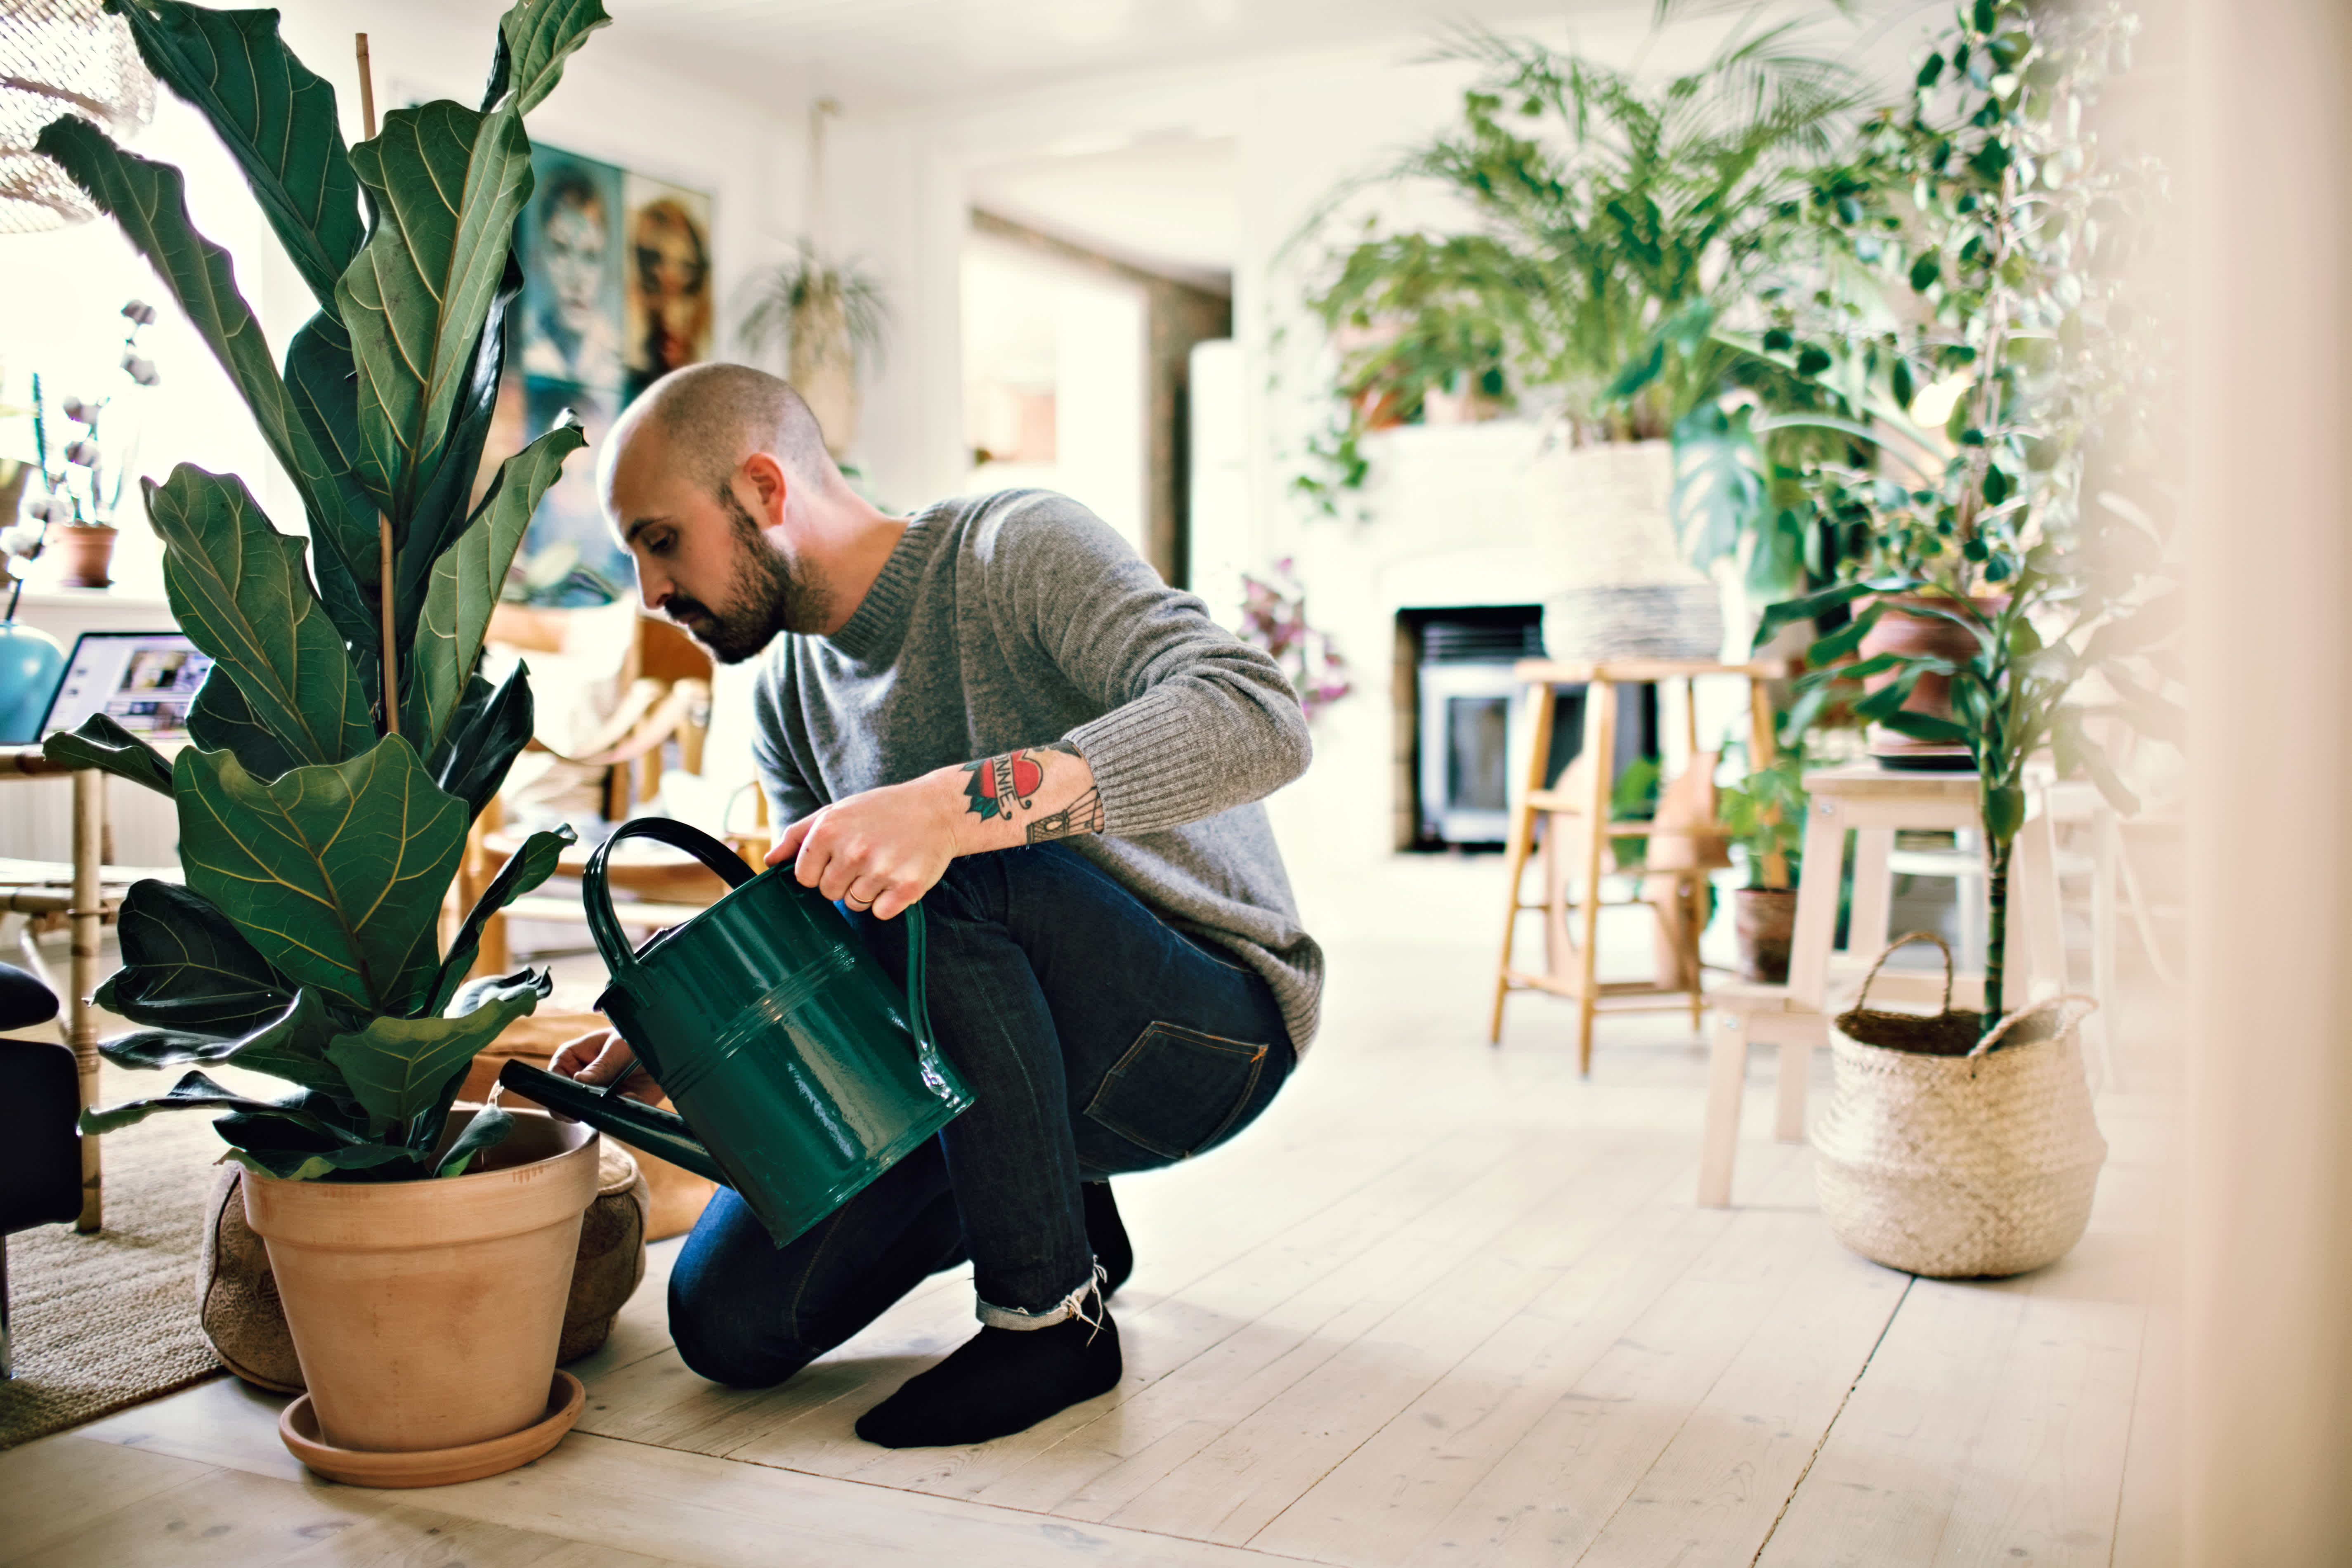 Man watering his house plants as part of his spring cleaning routine for his mental health and overall wellness.